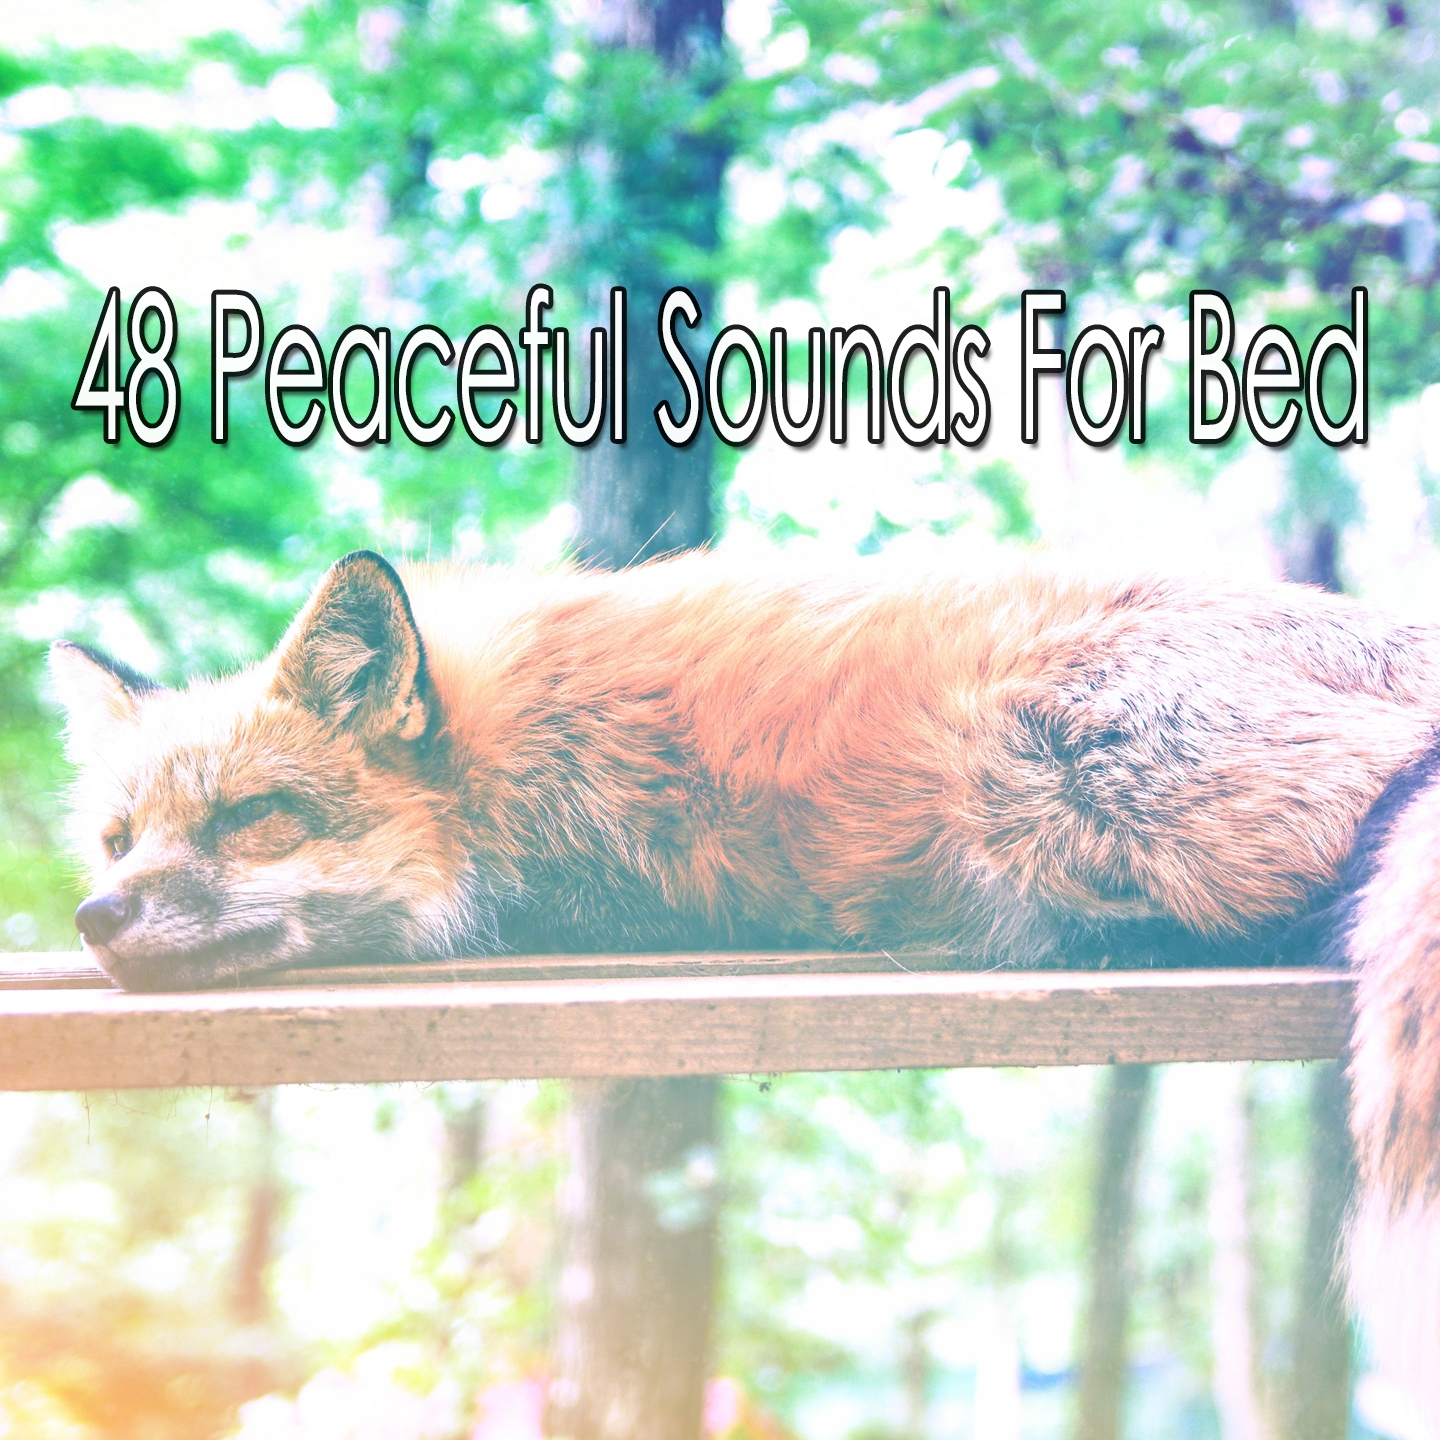 48 Peaceful Sounds For Bed